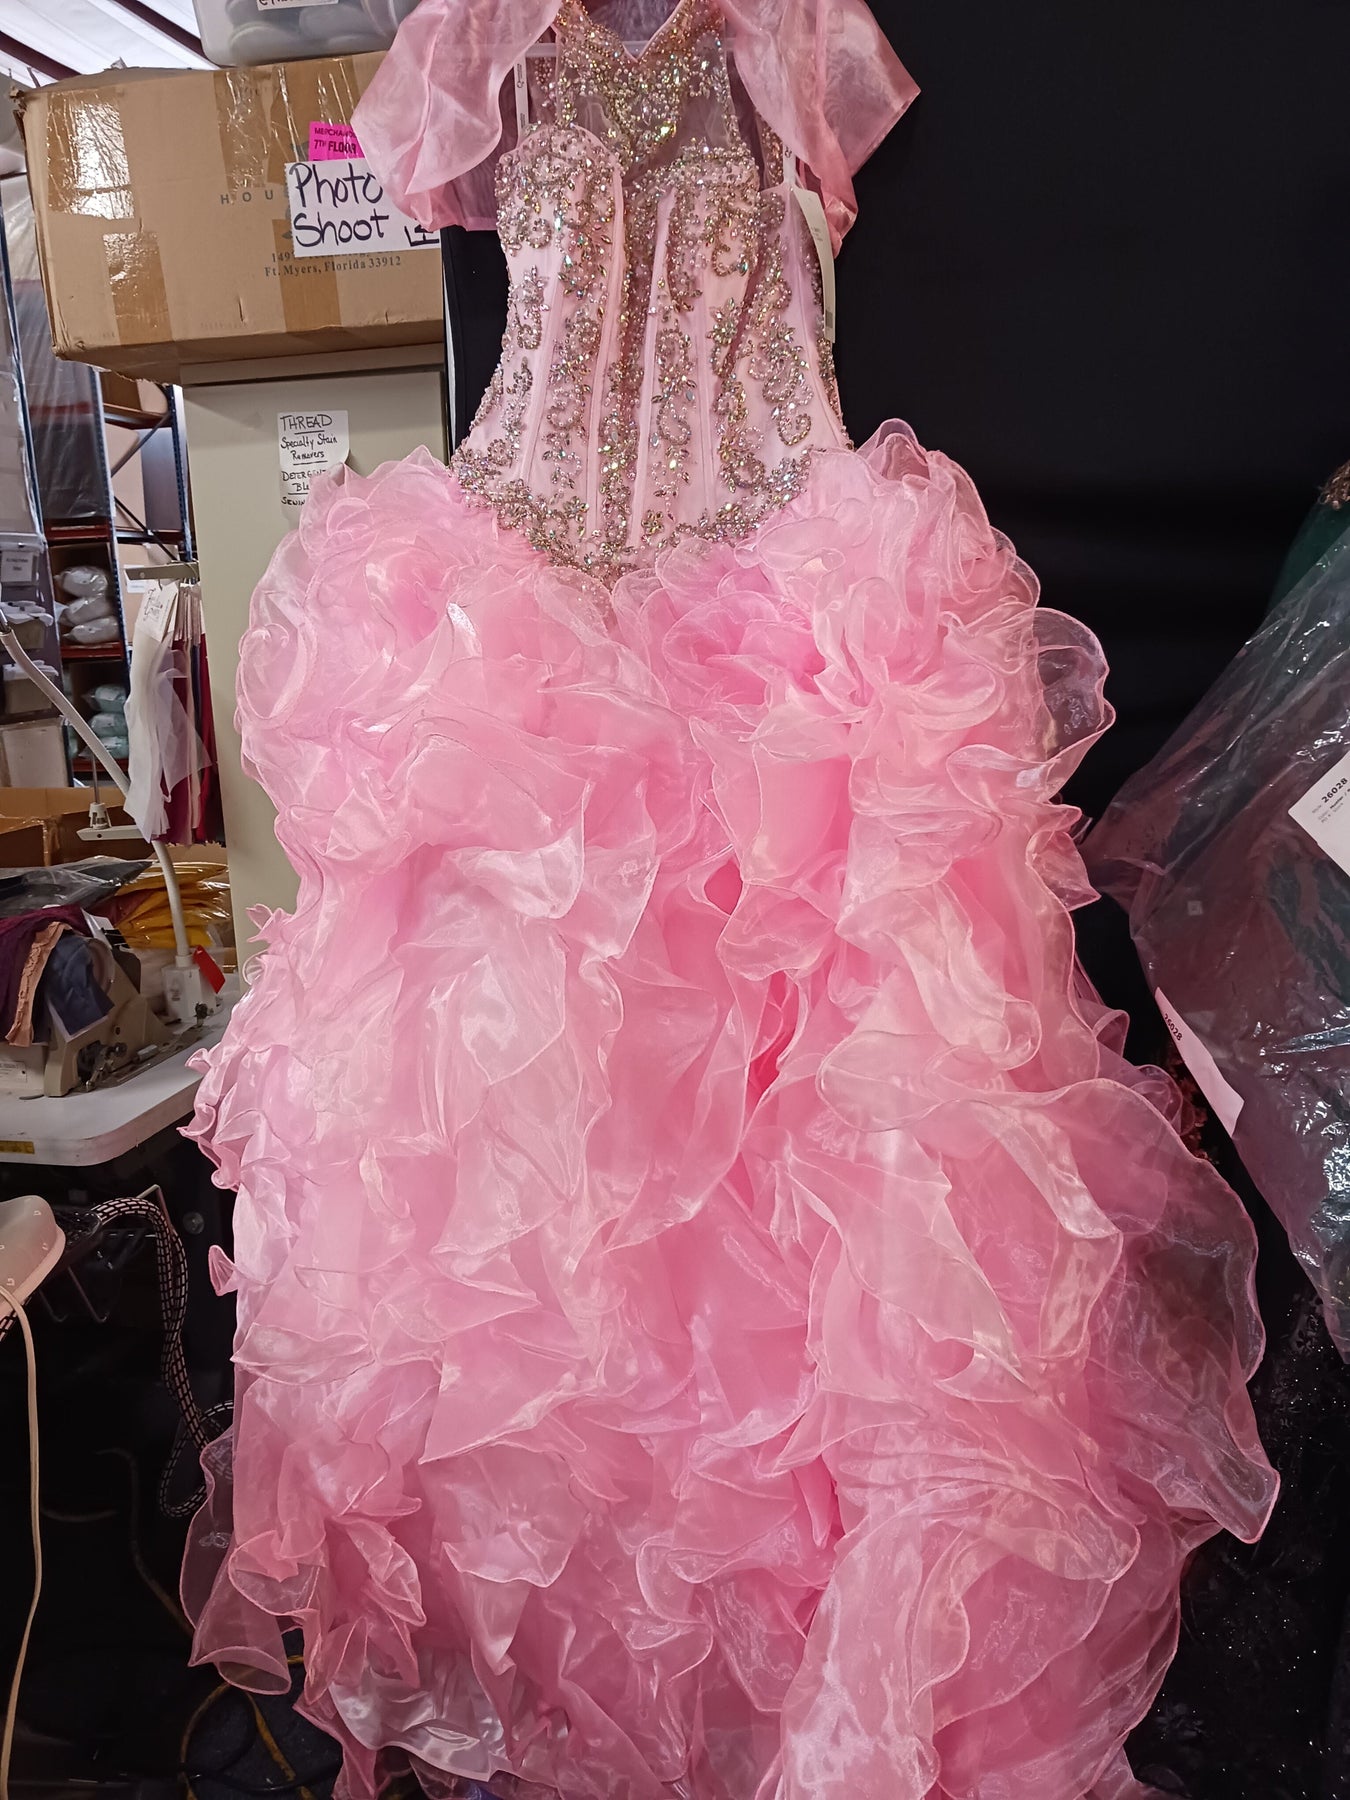 Ruffled Illusion Quinceanera Dress by House of Wu 26871 – ABC Fashion